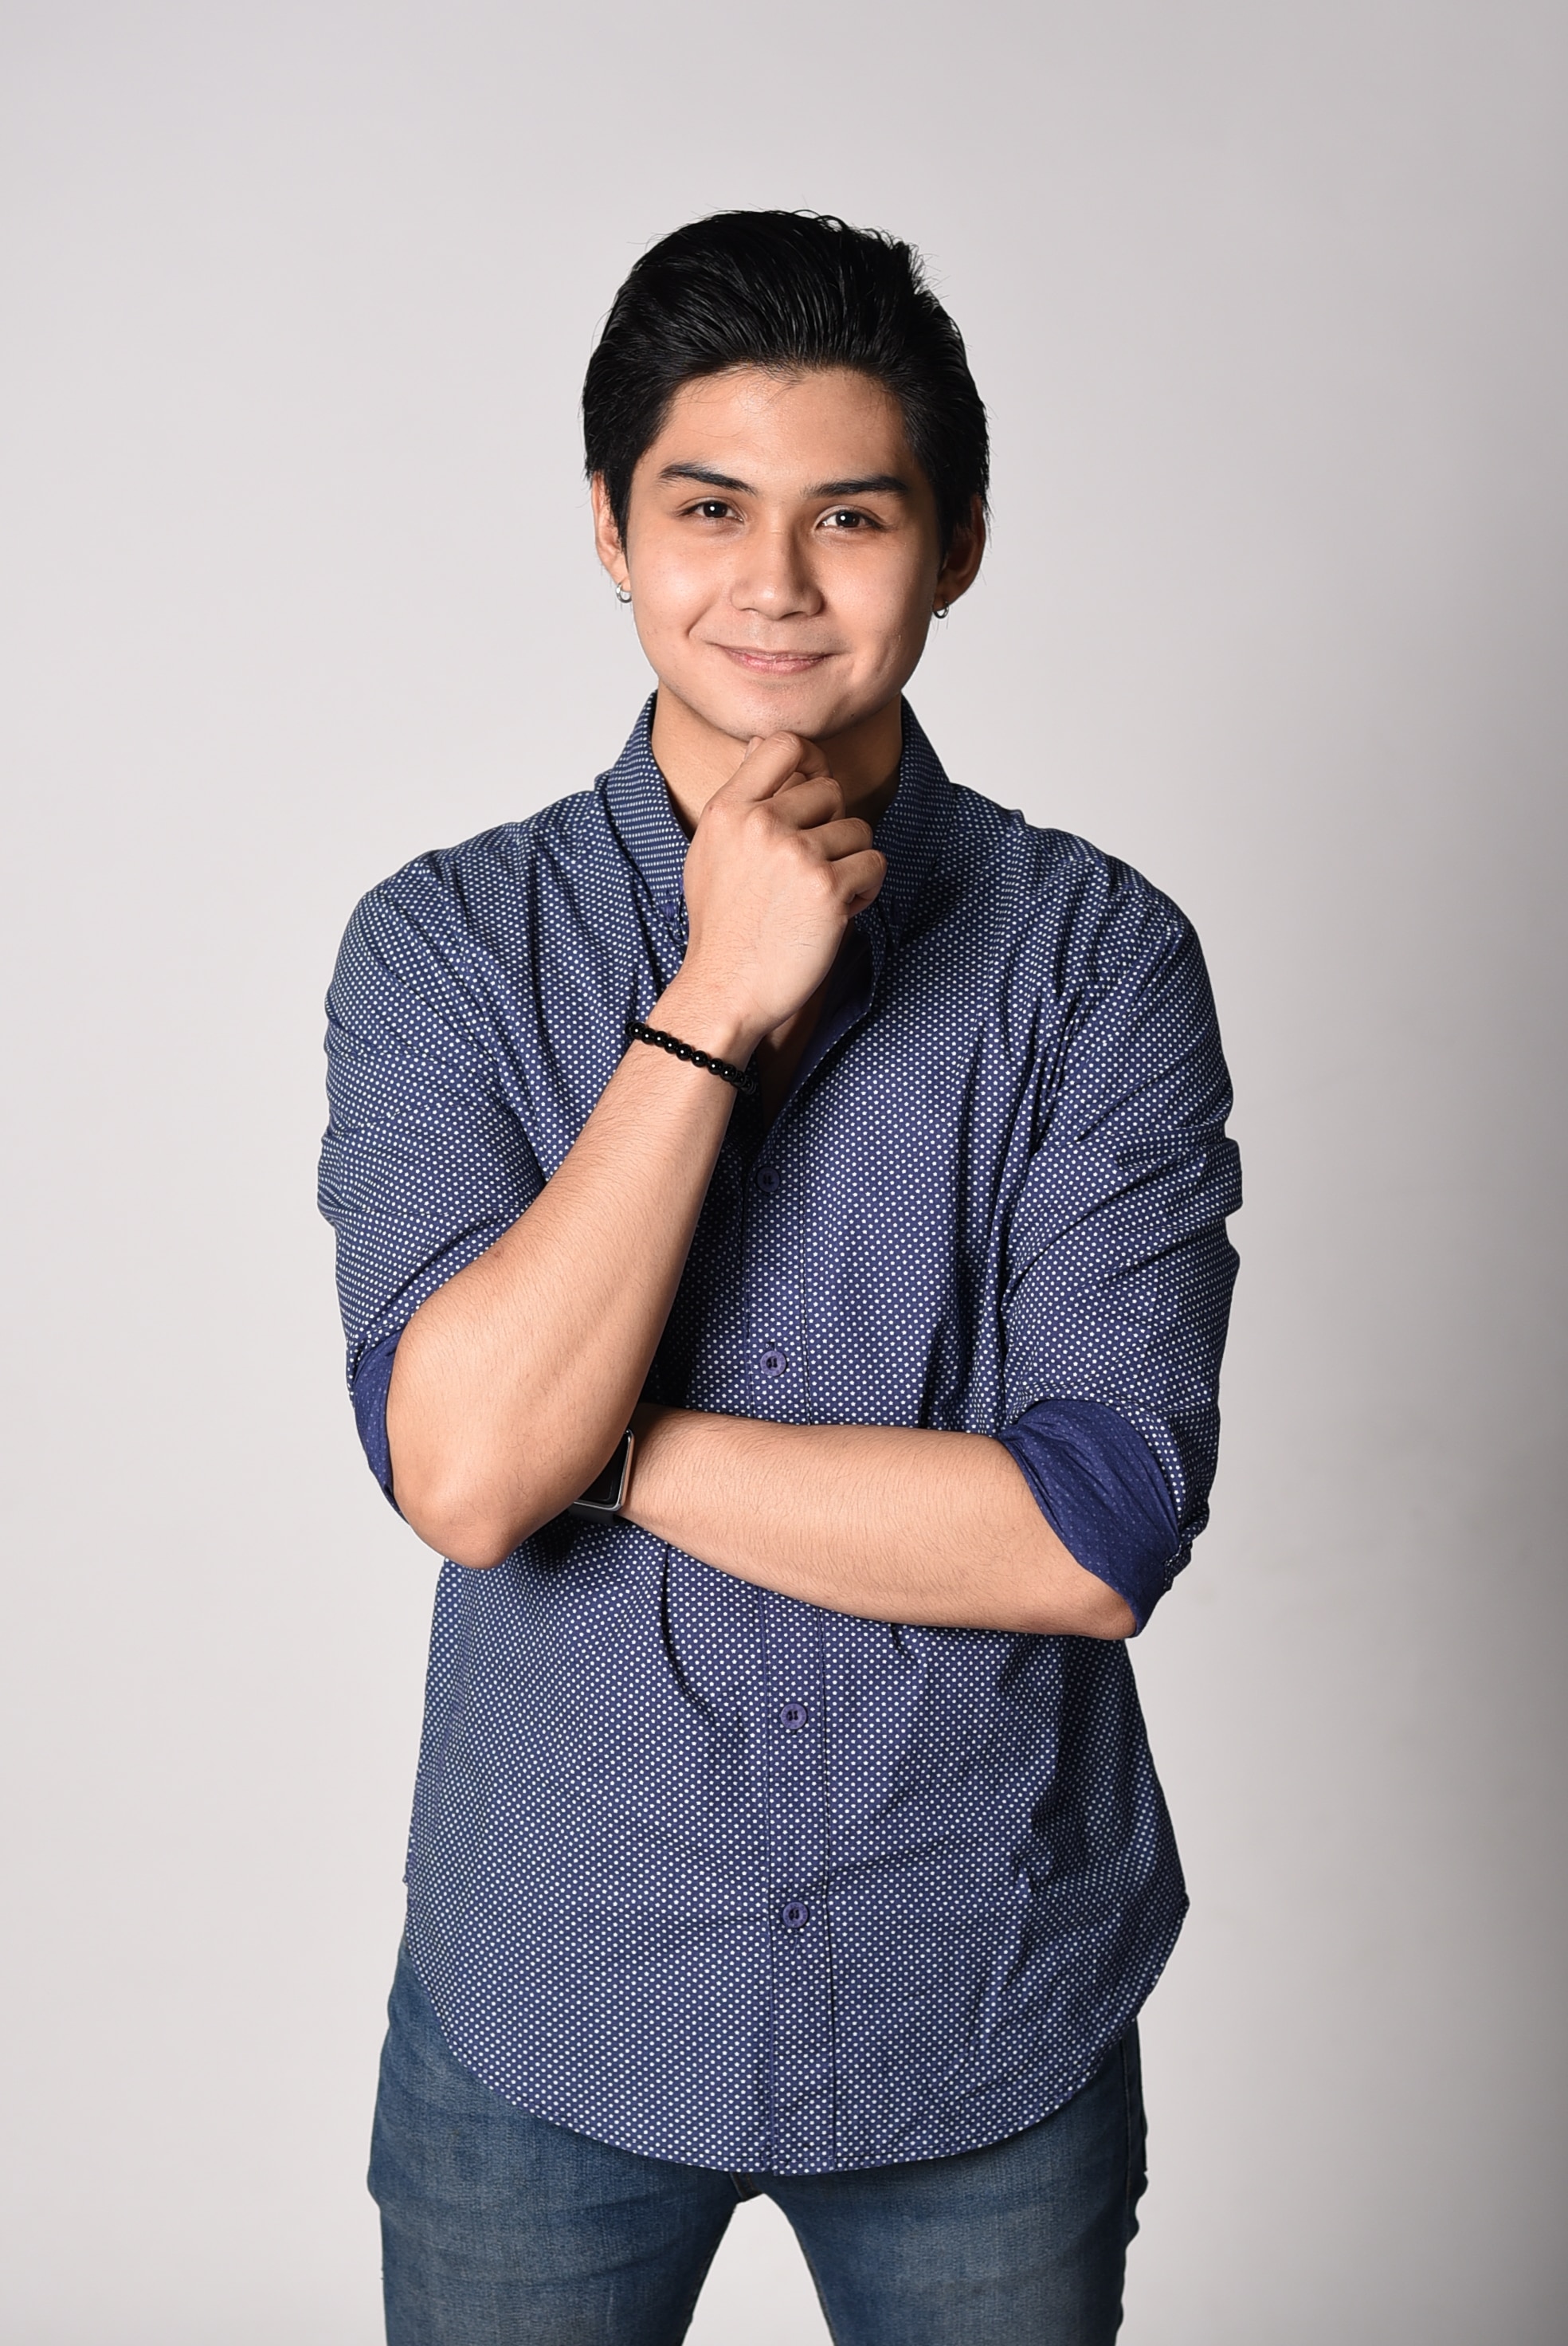 Ryle dabbles into music in debut single 